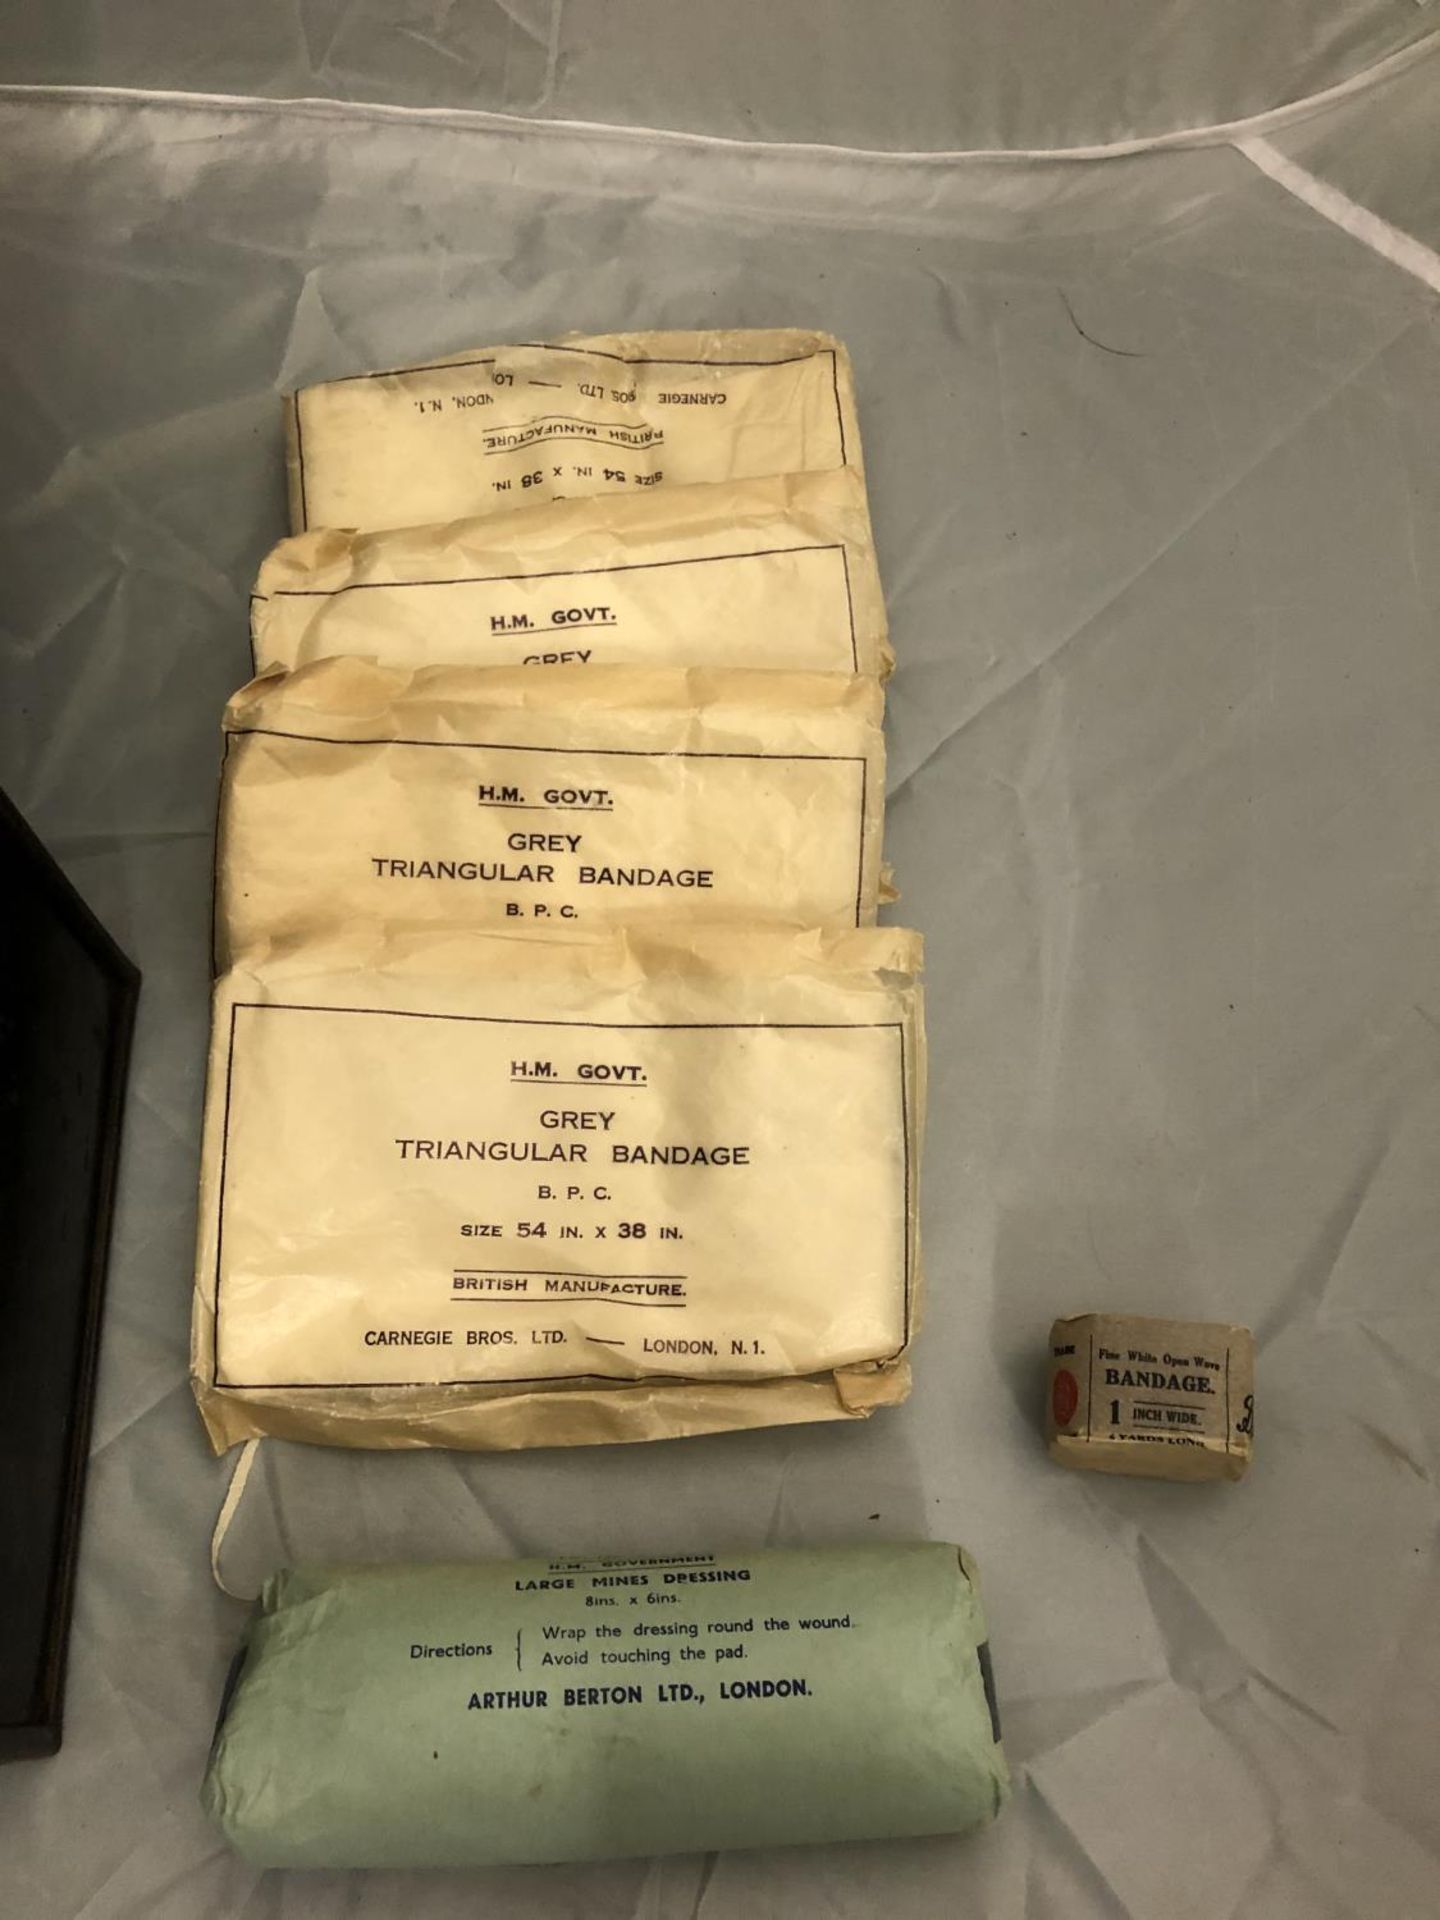 A WORLD WAR II A.R.P. TIN AND A FIRST AID KIT - Image 3 of 3